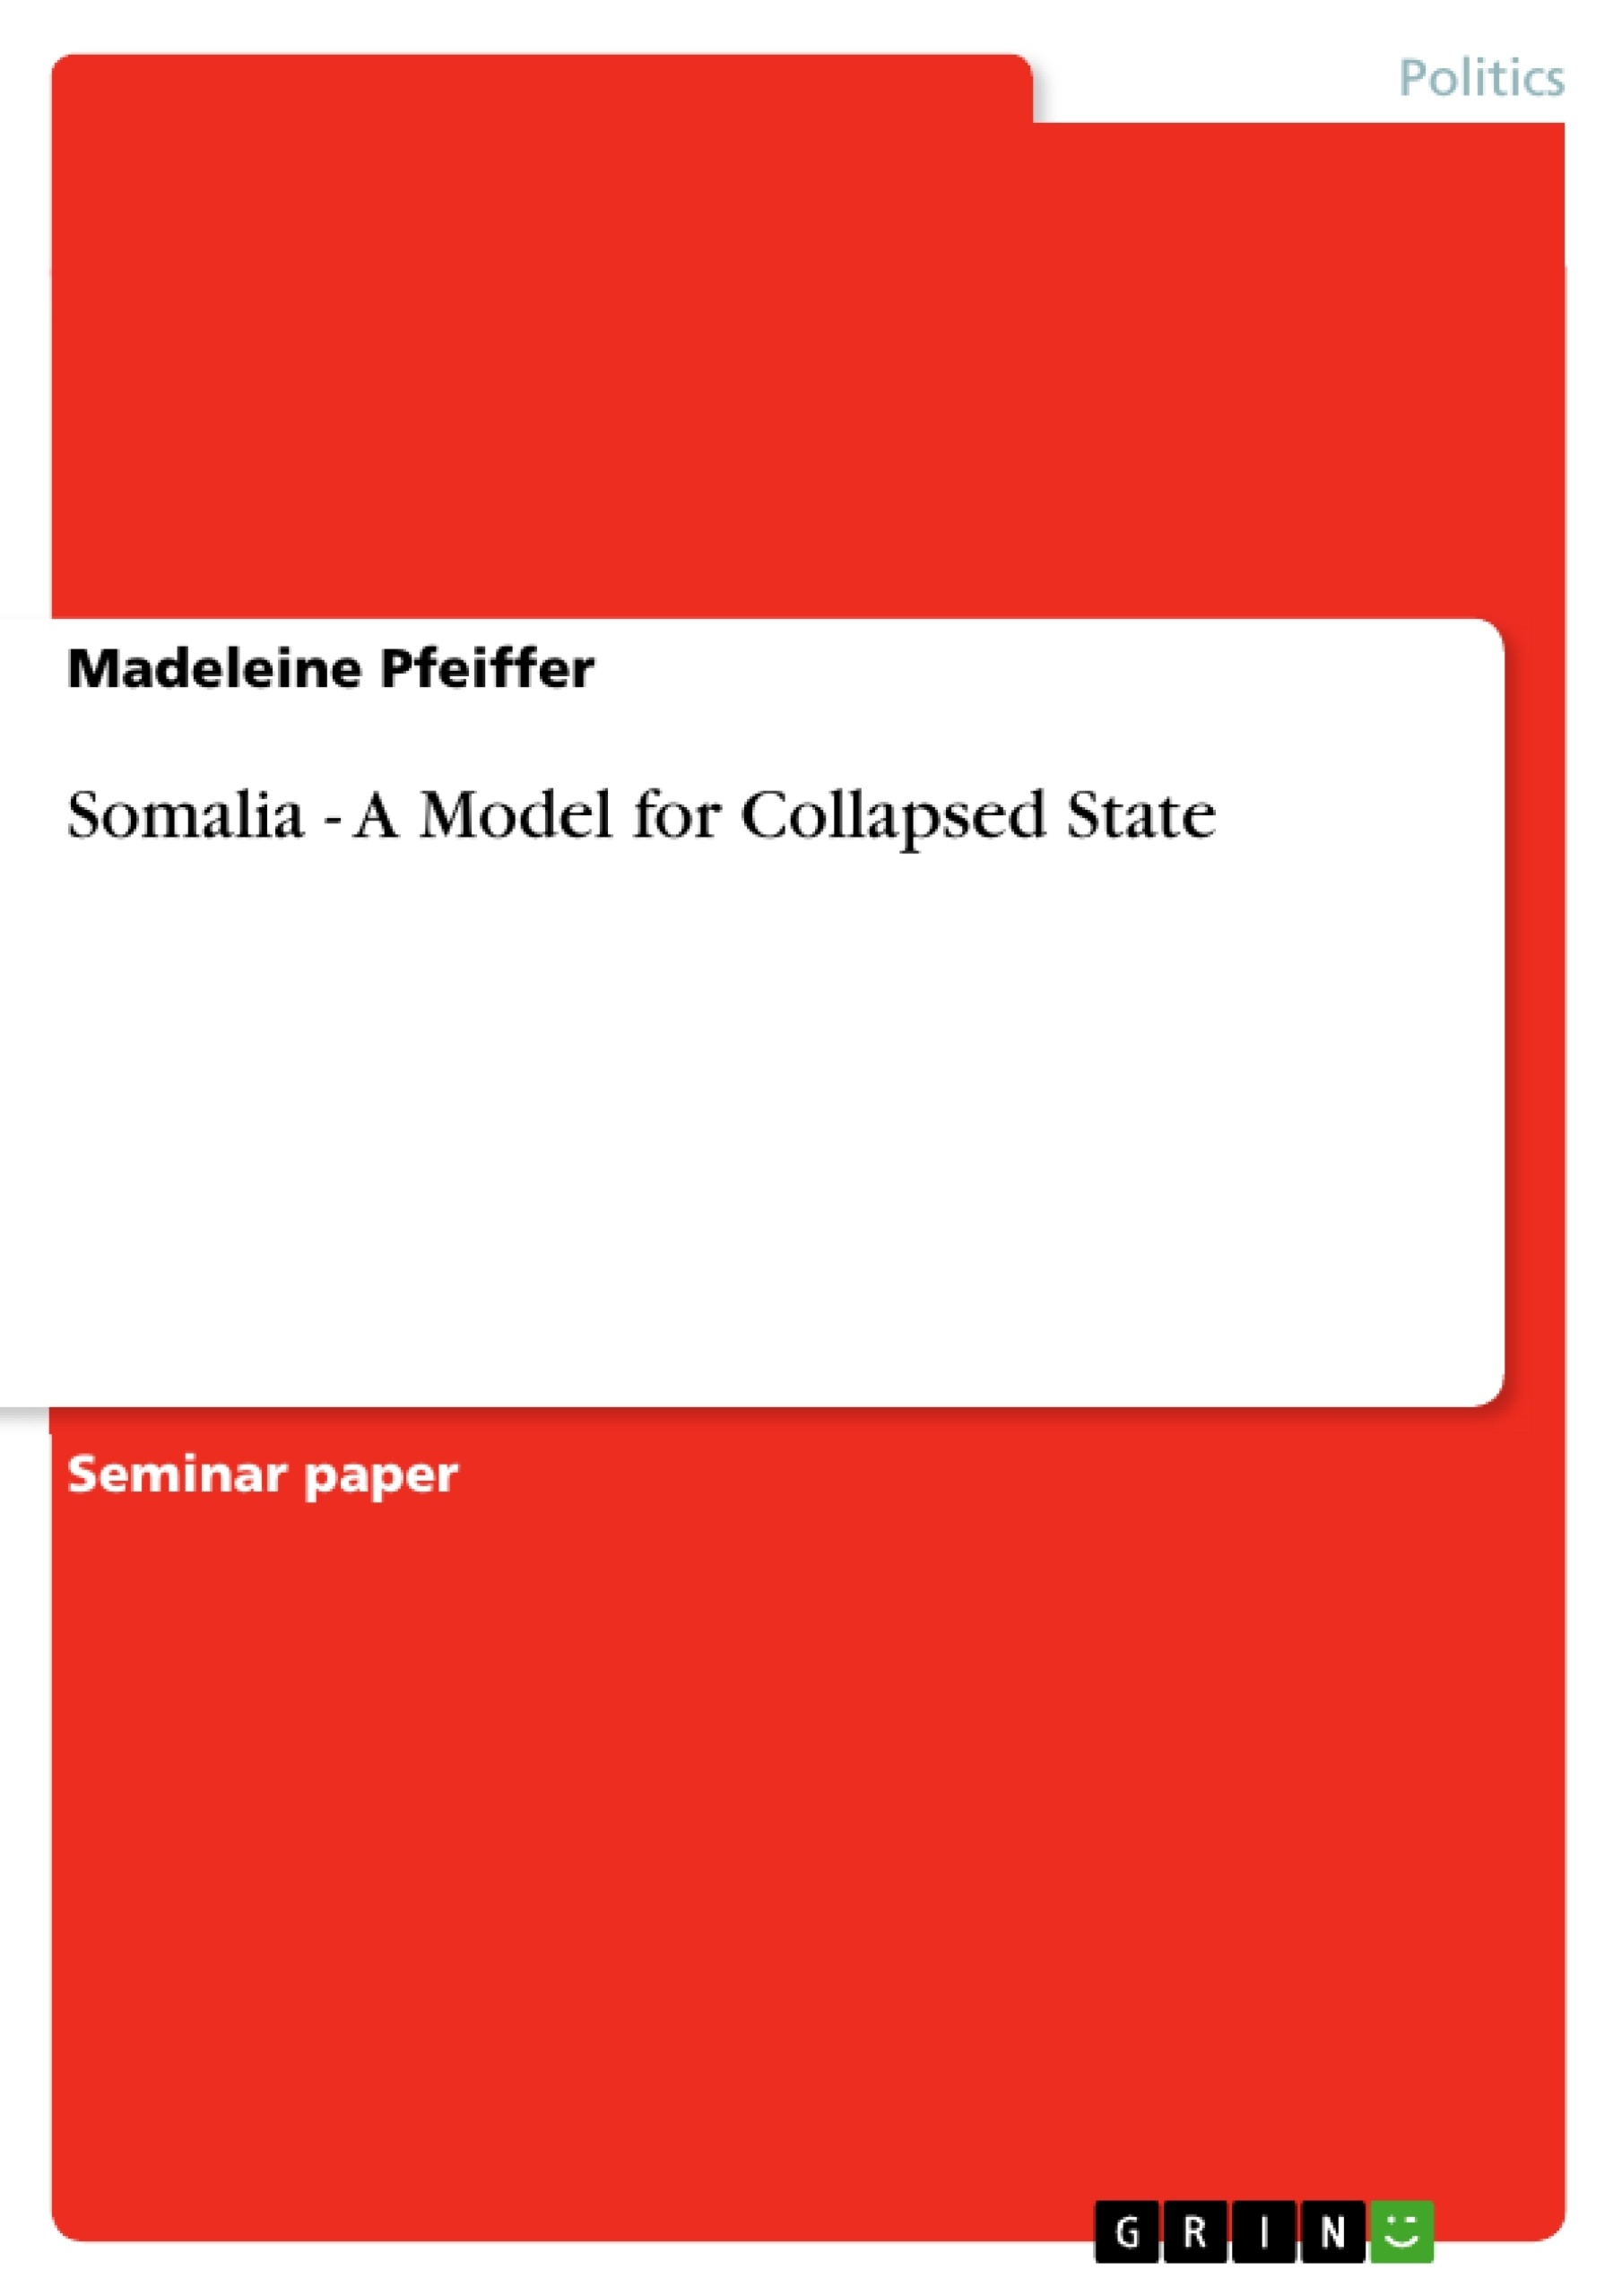 Title: Somalia - A Model for Collapsed State